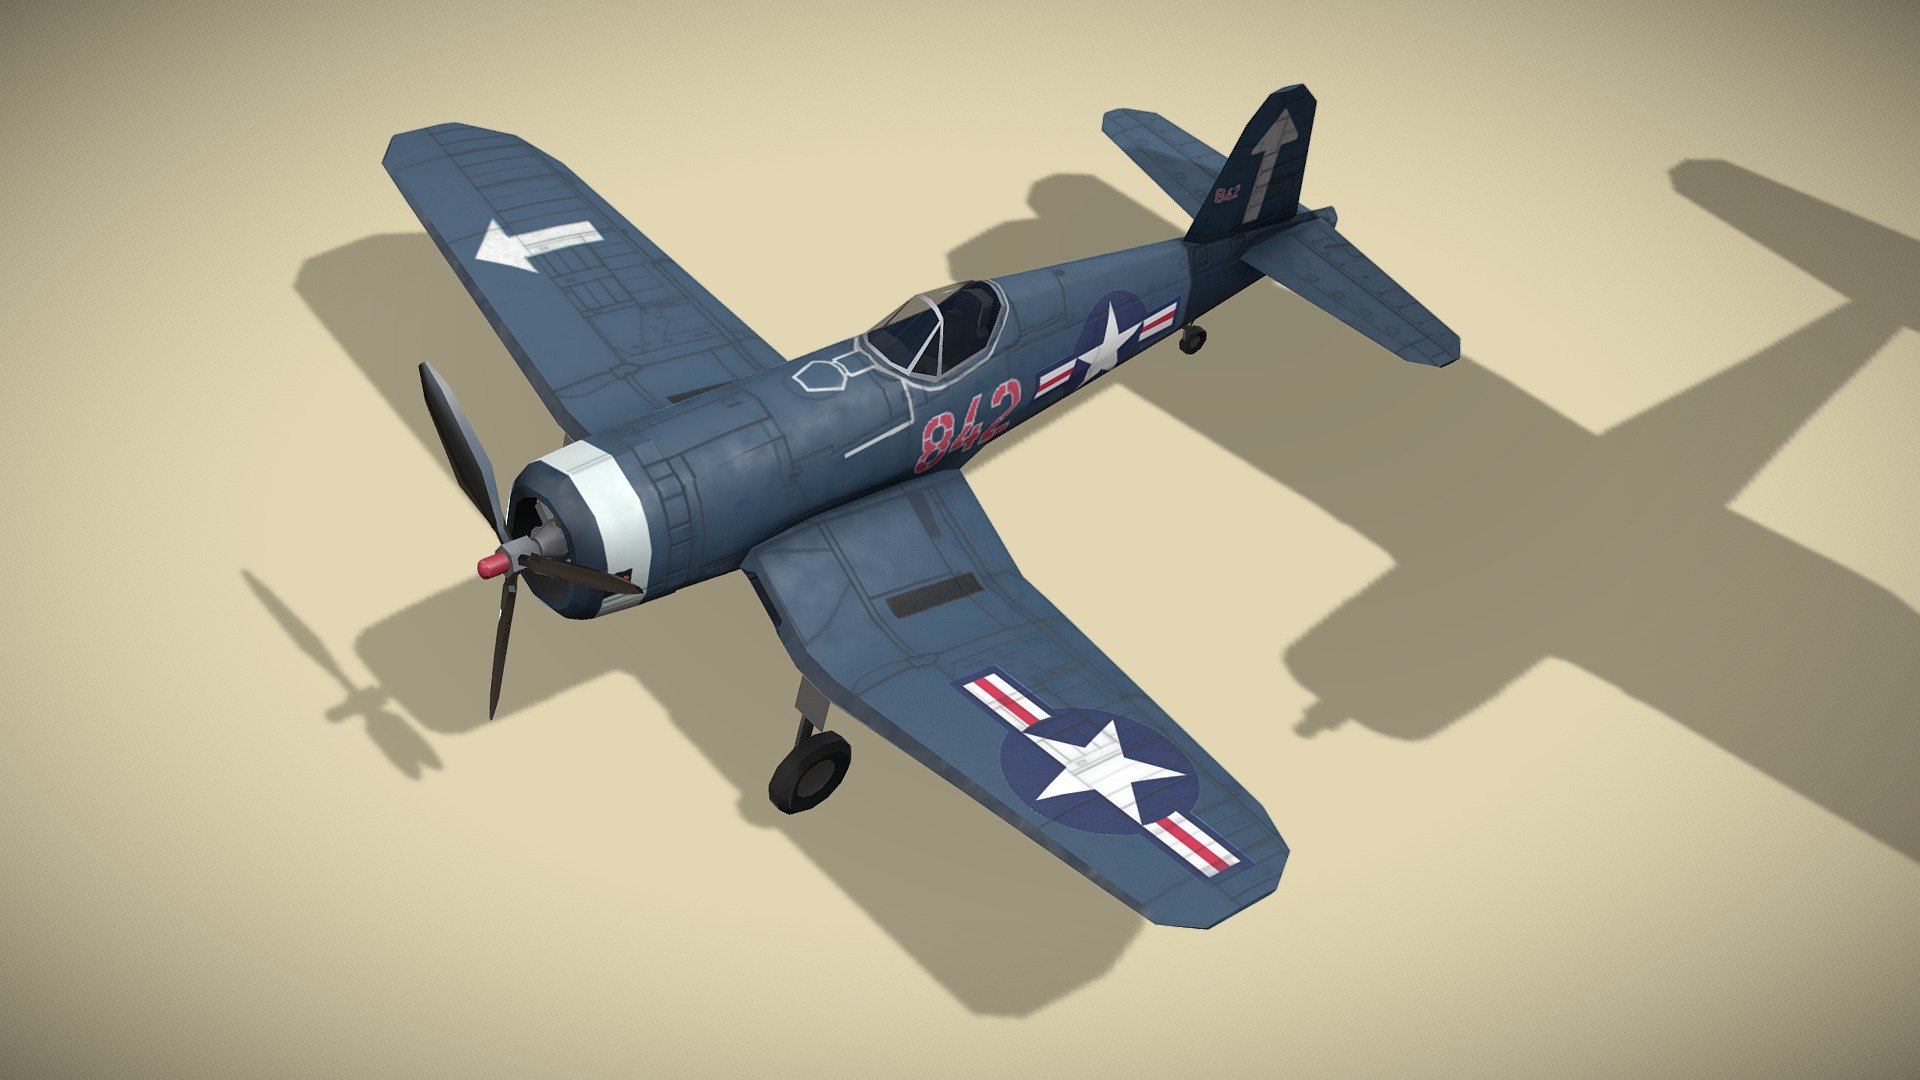 Vought F4U Corsair

Lowpoly model of american fighter plane.



Vought F4U Corsair is an American fighter aircraft which saw service in World War II and the Korean War. Designed and initially manufactured by Chance Vought, the Corsair was soon in great demand; additional production contracts were given to Goodyear and Brewster.

The Corsair was designed and operated as a carrier-based aircraft, and entered service in large numbers with the U.S. Navy in late 1944 and early 1945. It quickly became one of the most capable carrier-based fighter-bombers of World War II. Early problems with carrier landings and logistics led to it being eclipsed as the dominant carrier-based fighter by the F6F Hellcat, powered by the same Double Wasp engine.



1 standing version and 2 flying versions in set

Model has bump map, roughness map and 3 x diffuse textures.



Check also my other aircrafts and cars.

Patreon with monthly free model - Vought F4U Corsair lowpoly WW2 fighter - Buy Royalty Free 3D model by NETRUNNER_pl 3d model